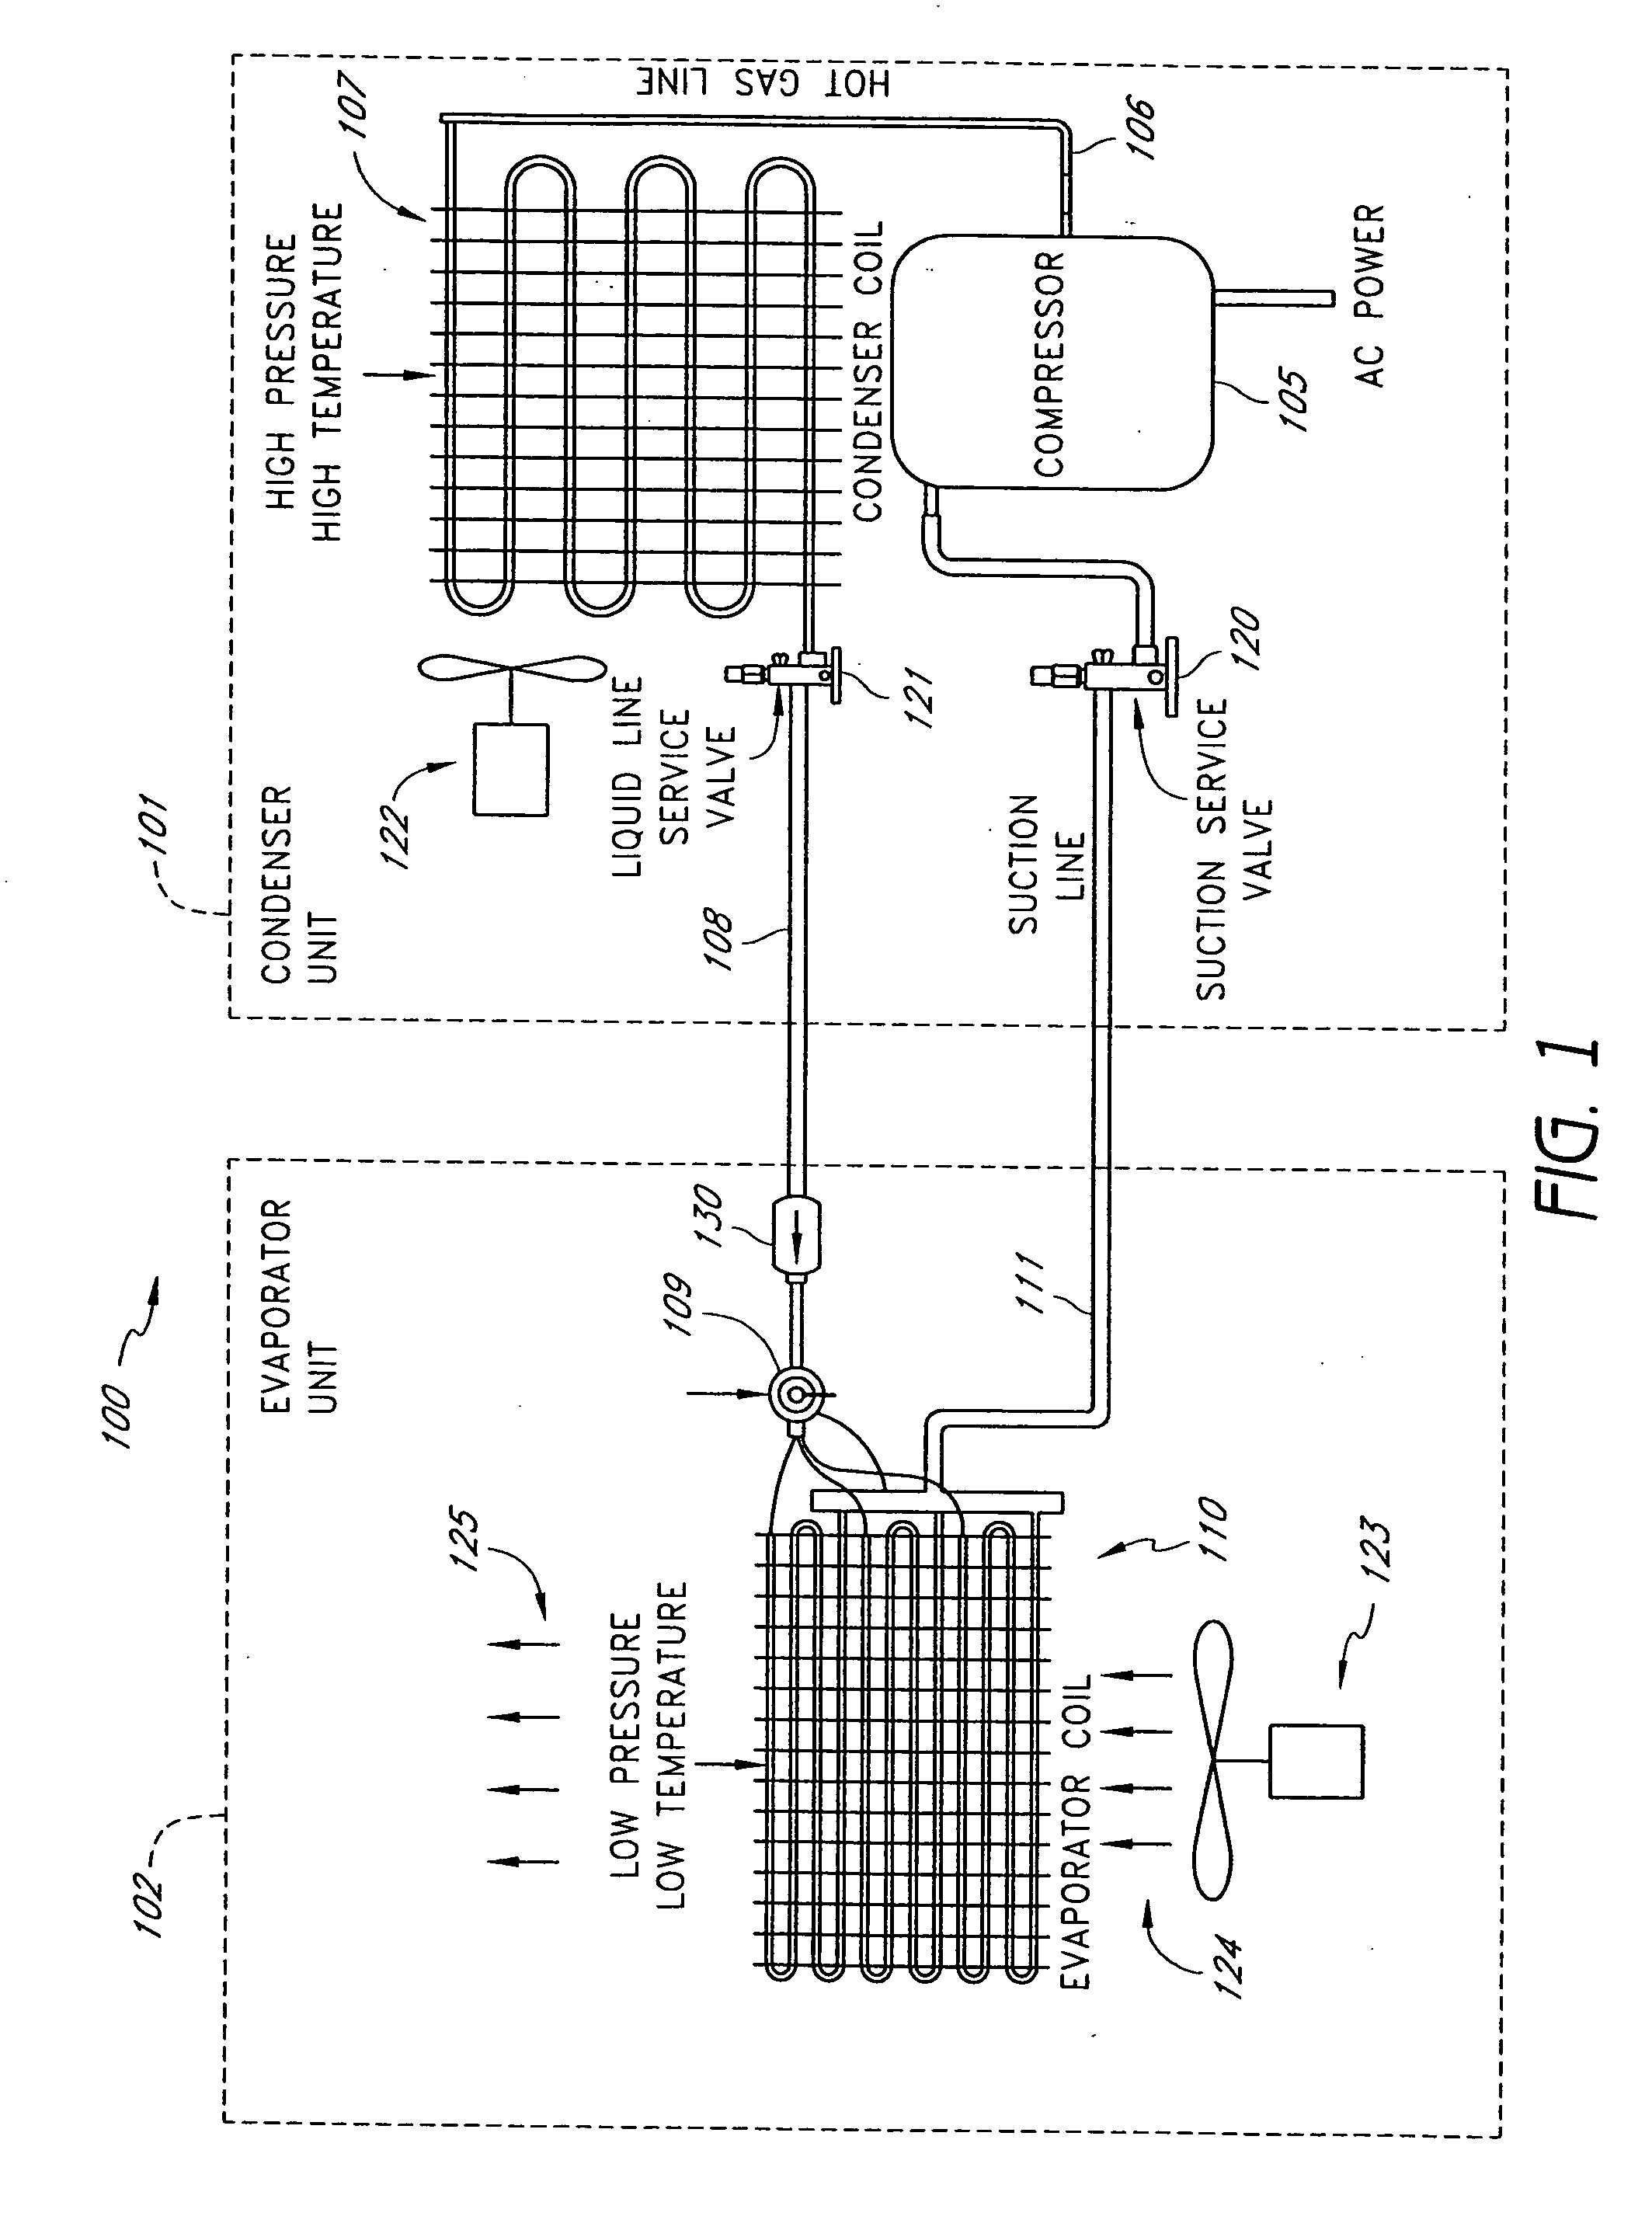 Intelligent thermostat system for load monitoring a refrigerant-cycle apparatus